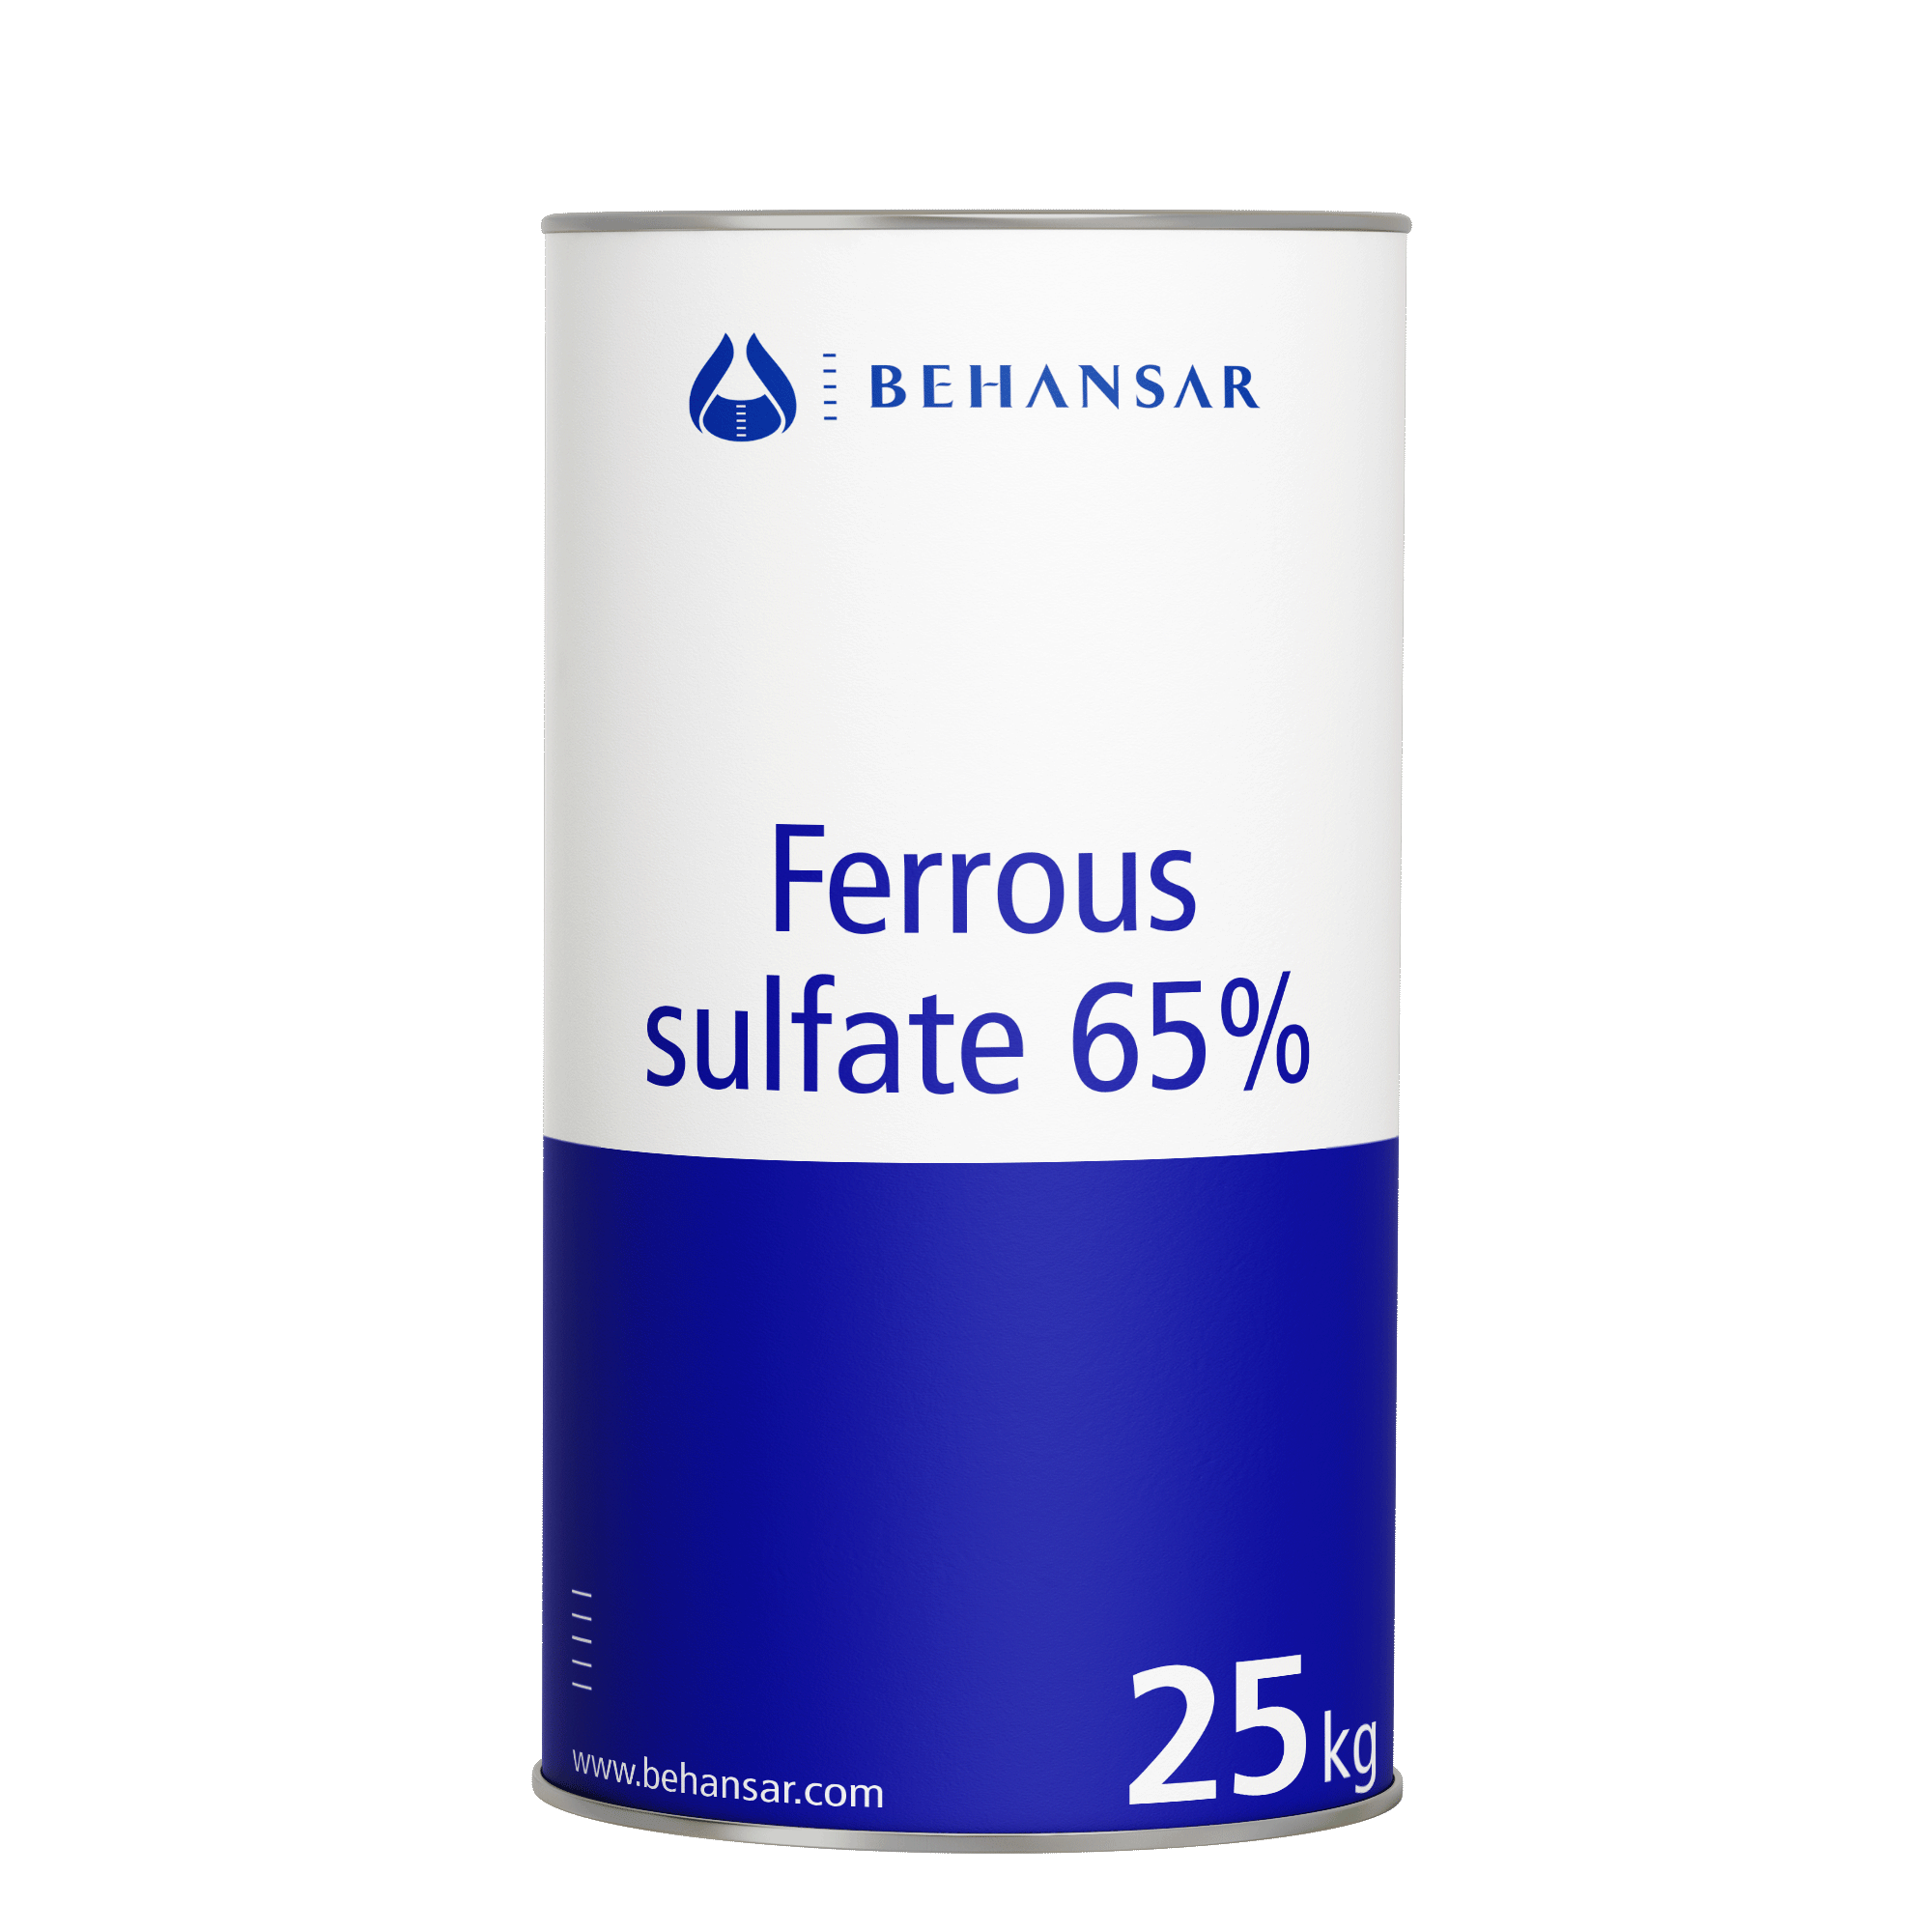 Ferrous sulfate 65% is one of the products of Behansar Co